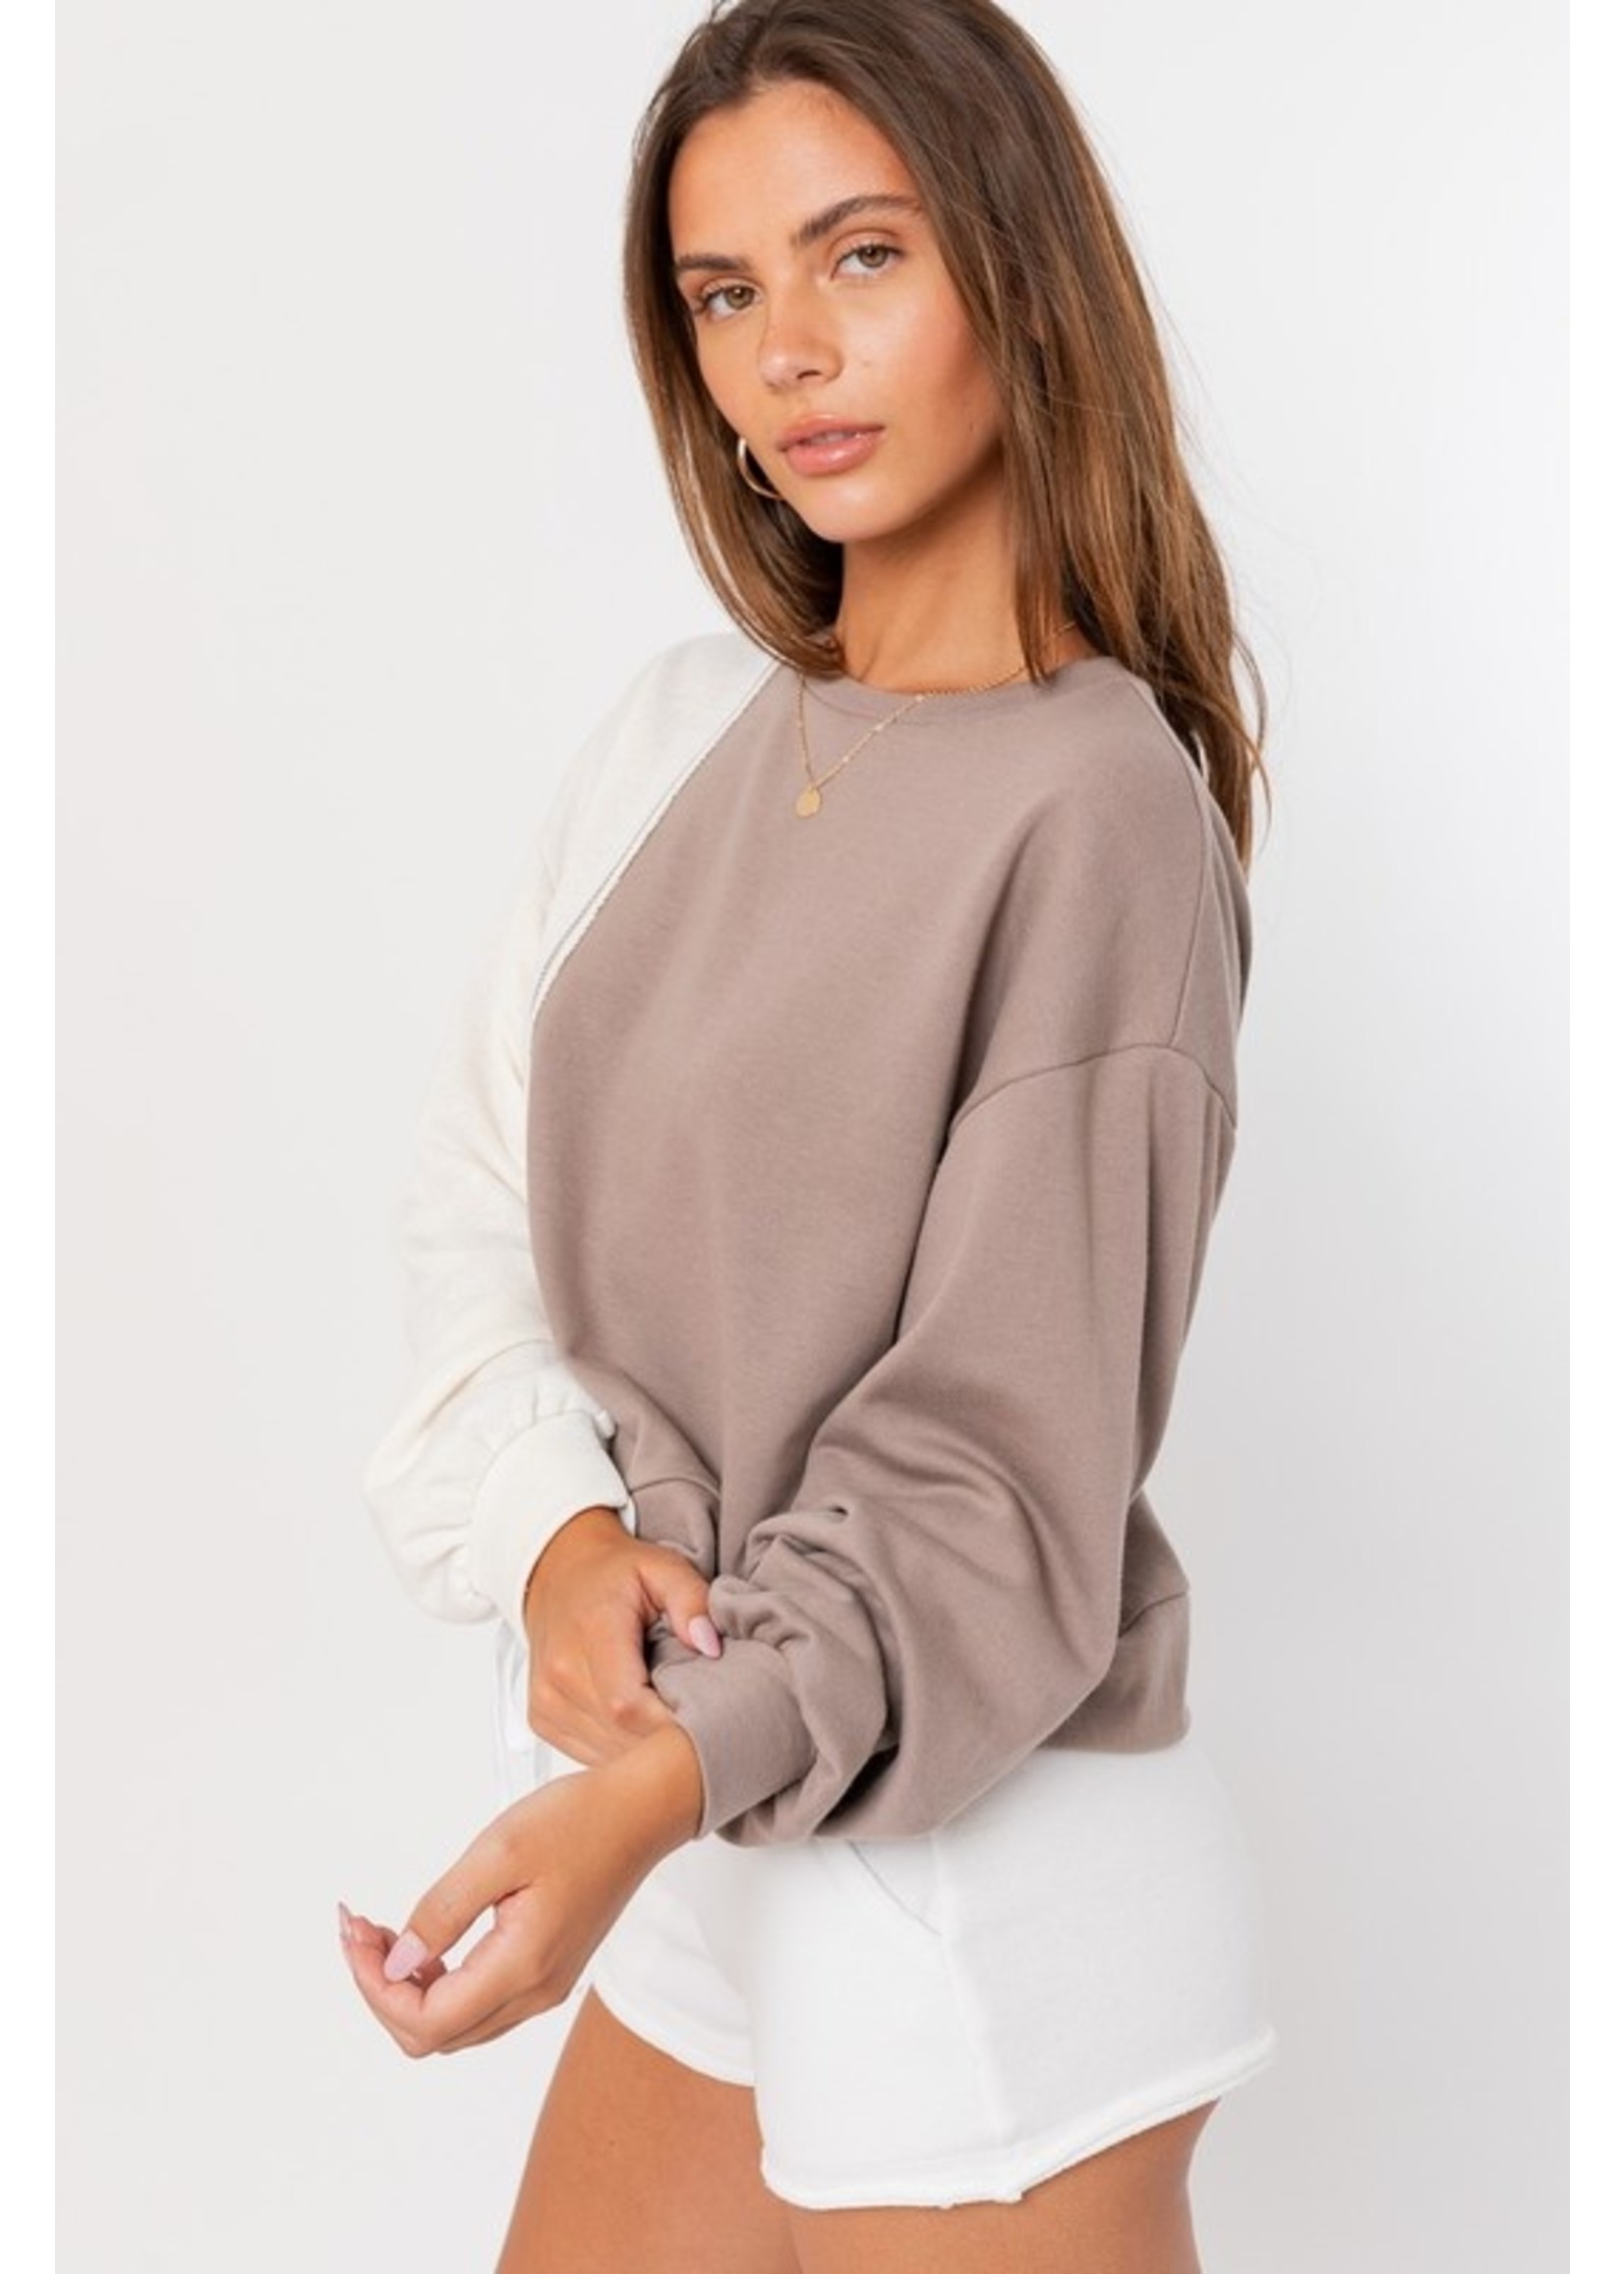 Le Lis Long Sleeve Contrast Pullover - KT6499